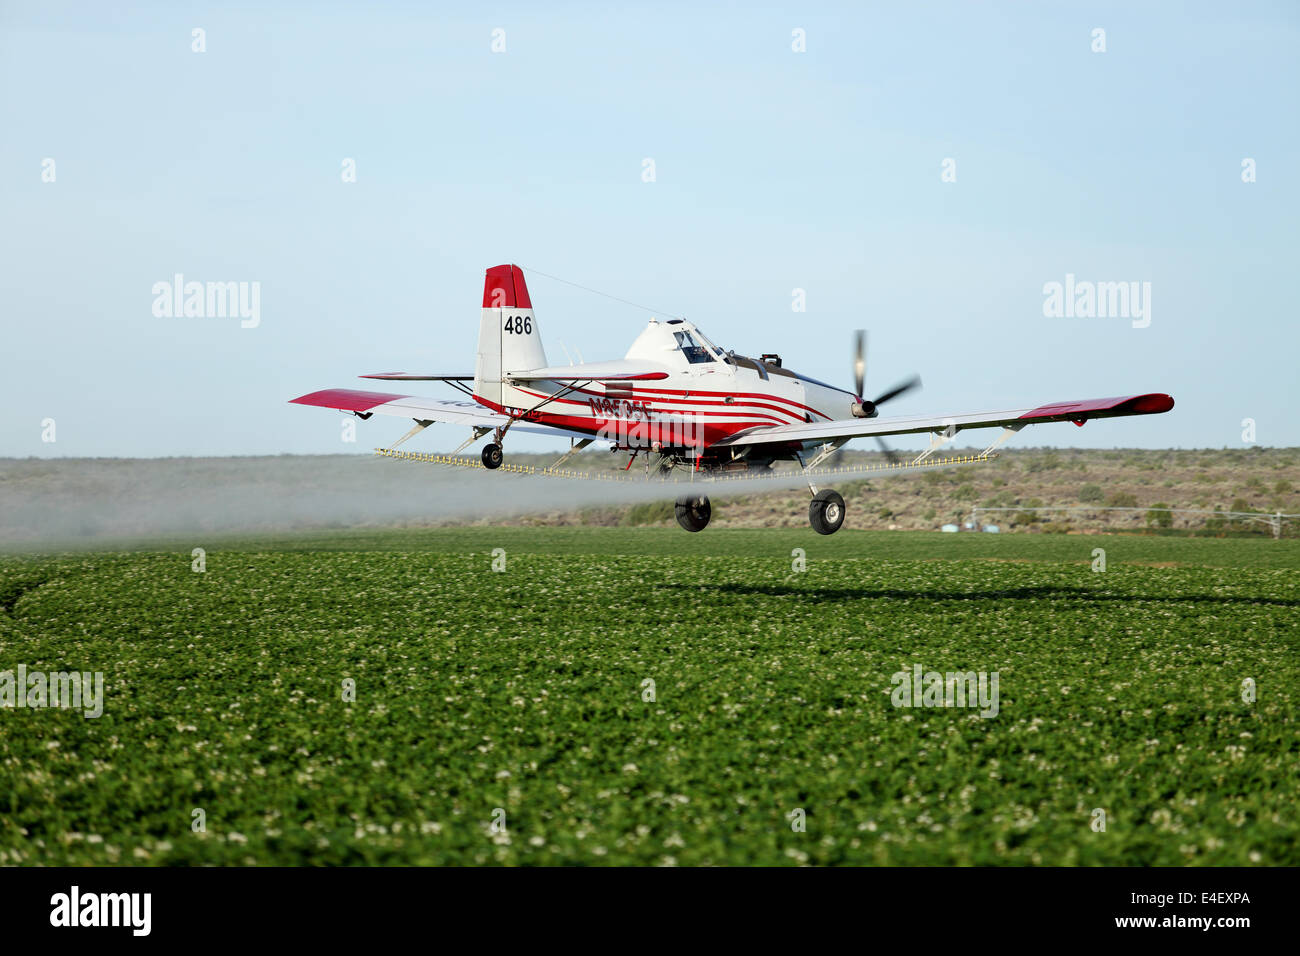 A view of a crop duster spraying green farmland. Stock Photo